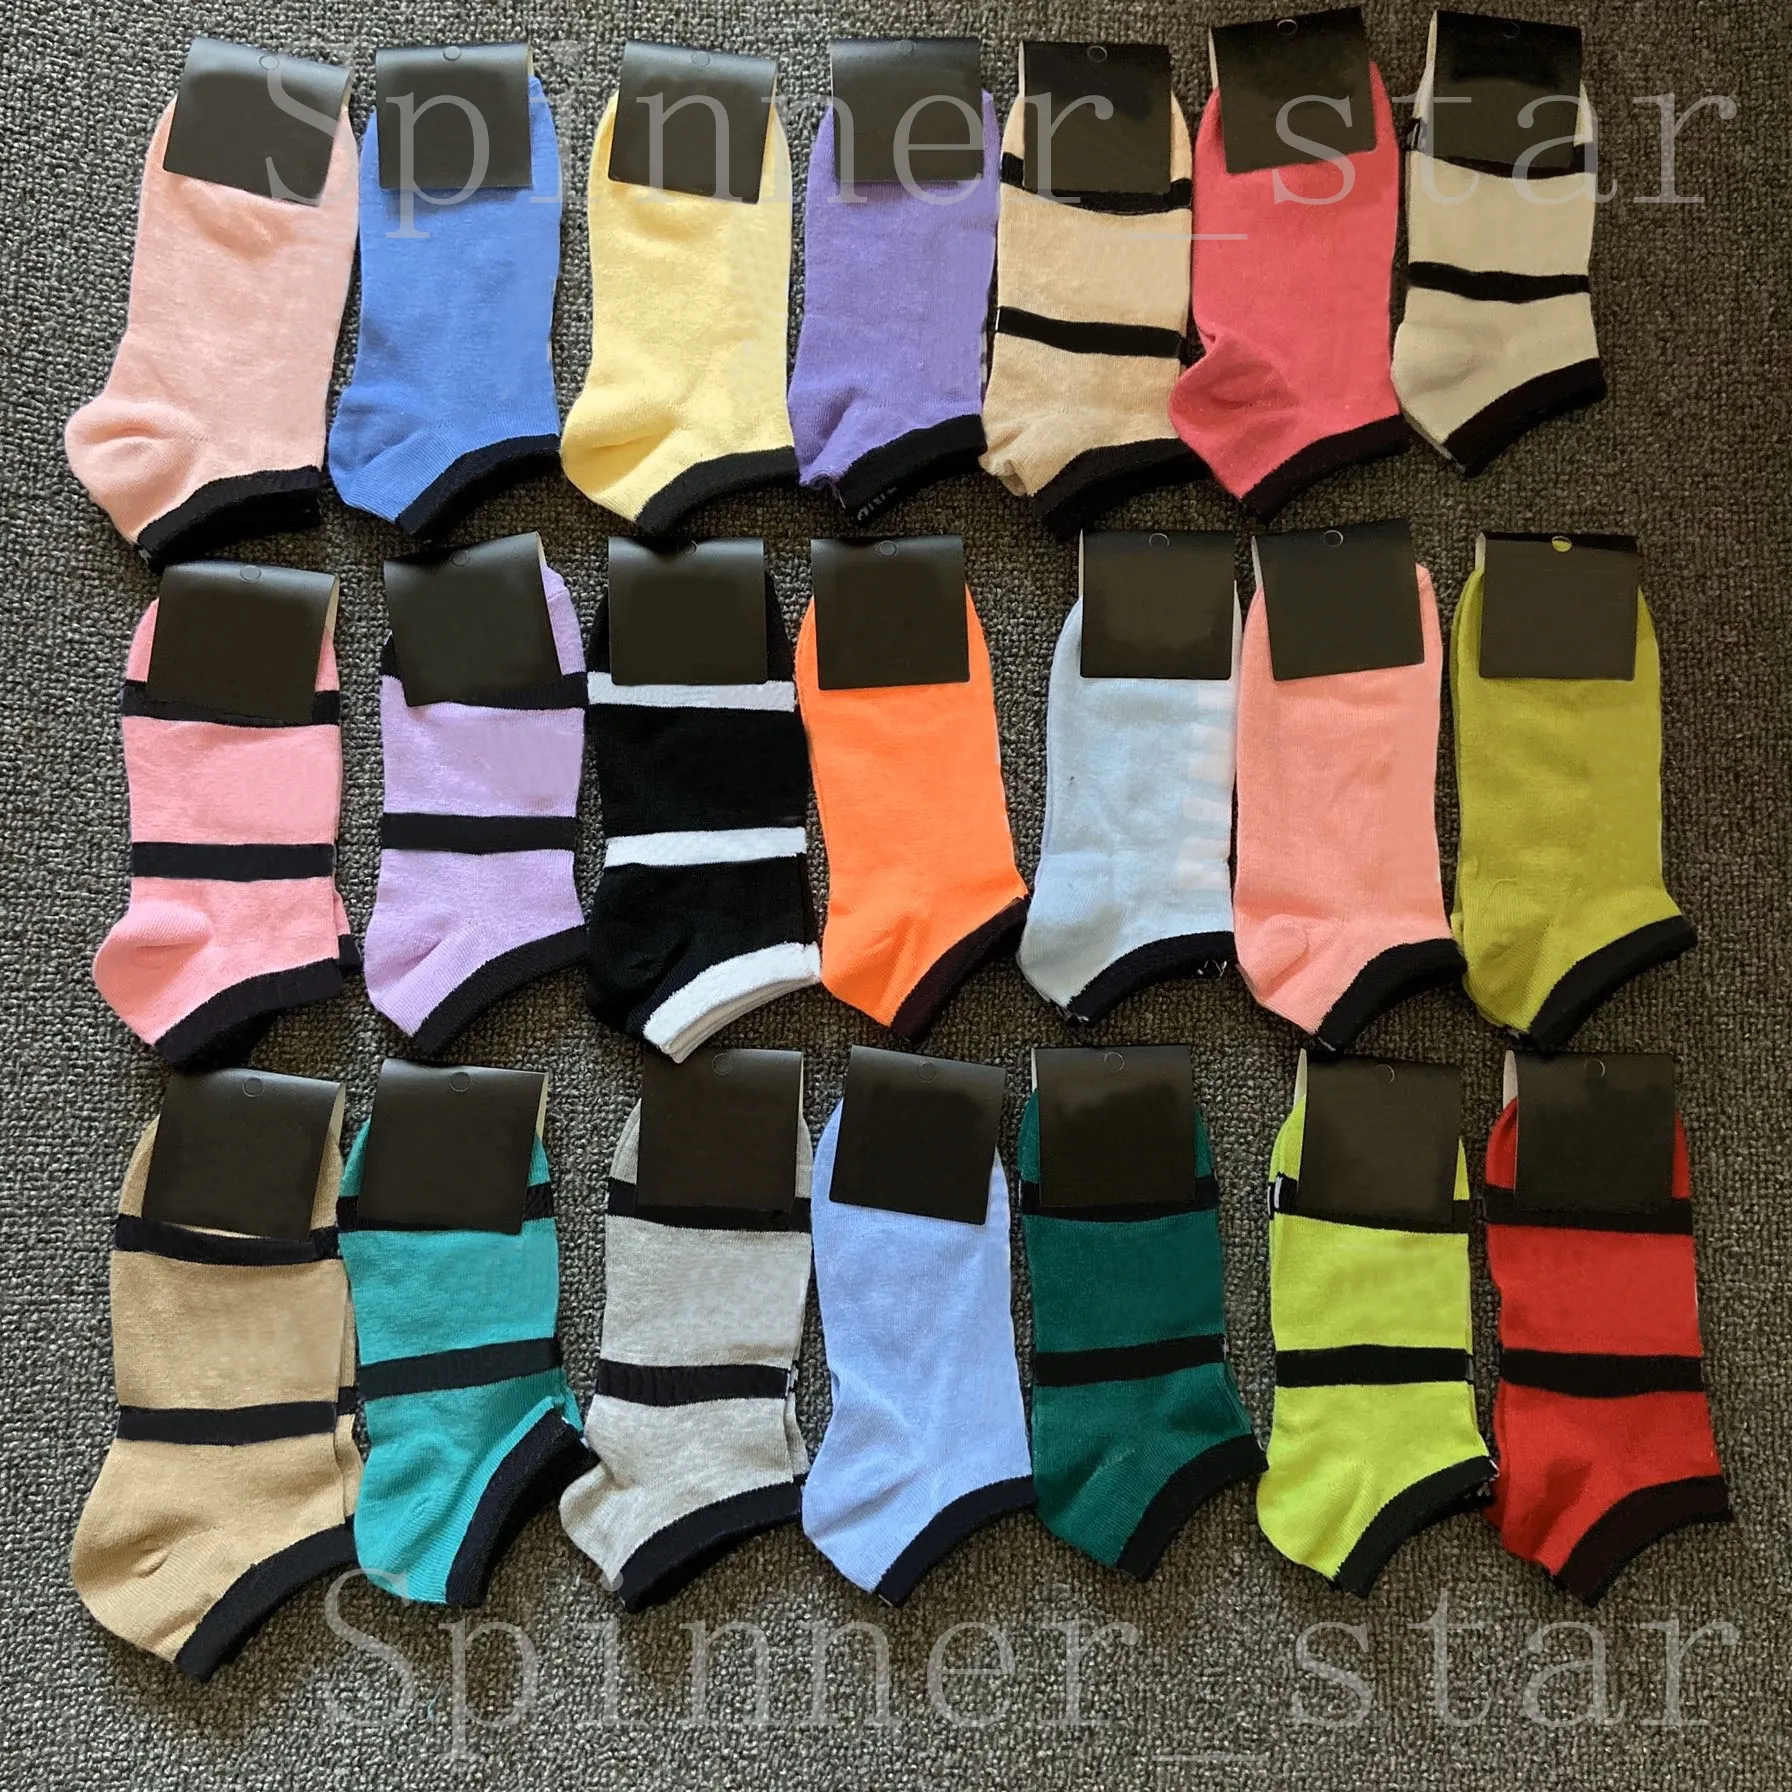 Four Seasons Socks Fashion Girls Women Cotton Nylon Multi-color Shallow Mouth Comfortable Sports Ankle Socks with Tags